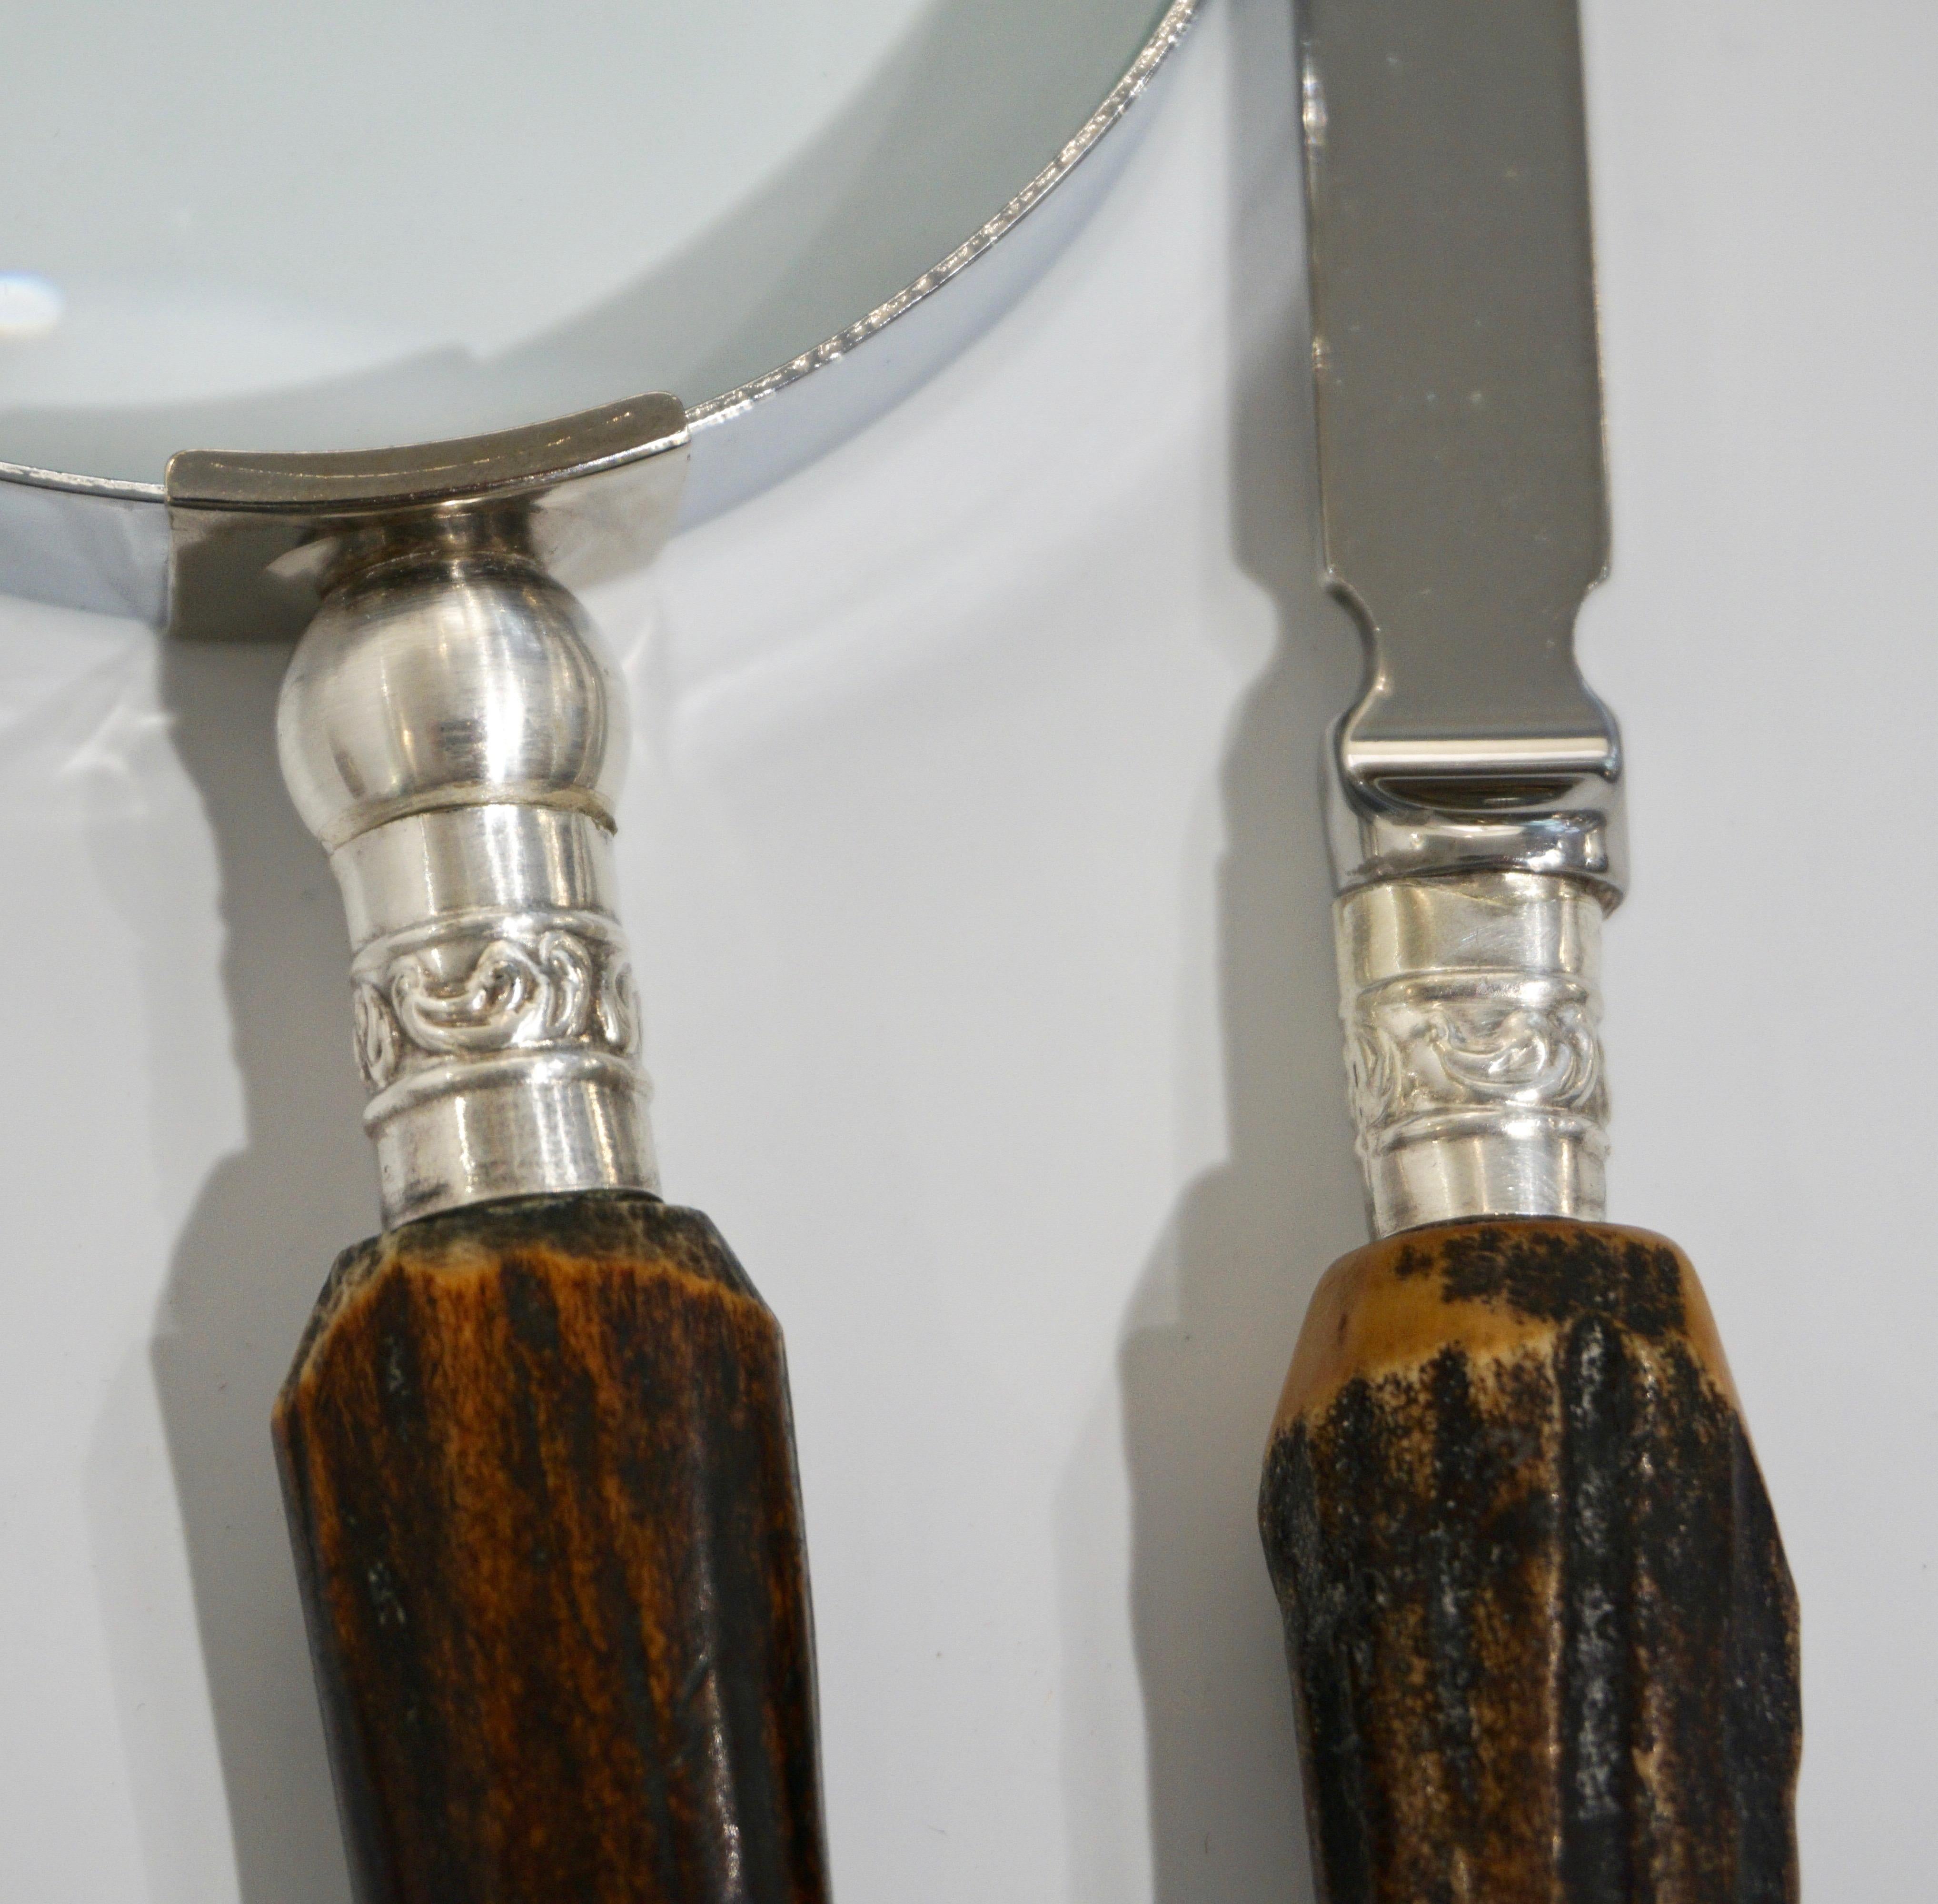 Edwardian 1970s English Magnifying Glass and Letter Opener Desk Set with Antler Handles